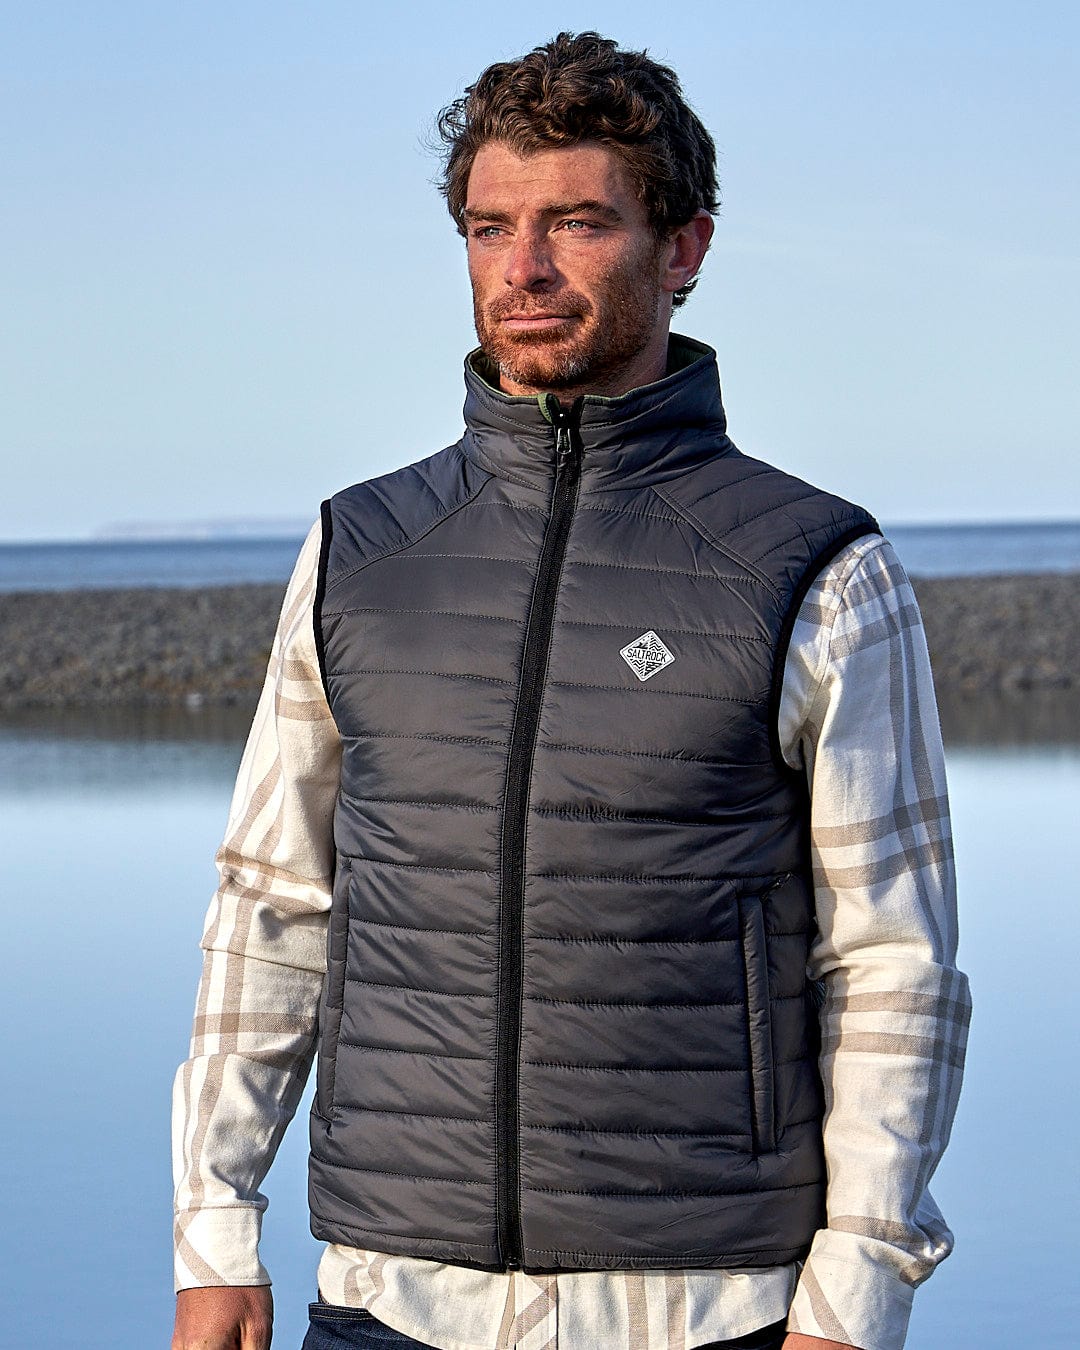 A man standing in front of a body of water wearing a Saltrock - Mens Reversible Gilet - Dark Green/Black.